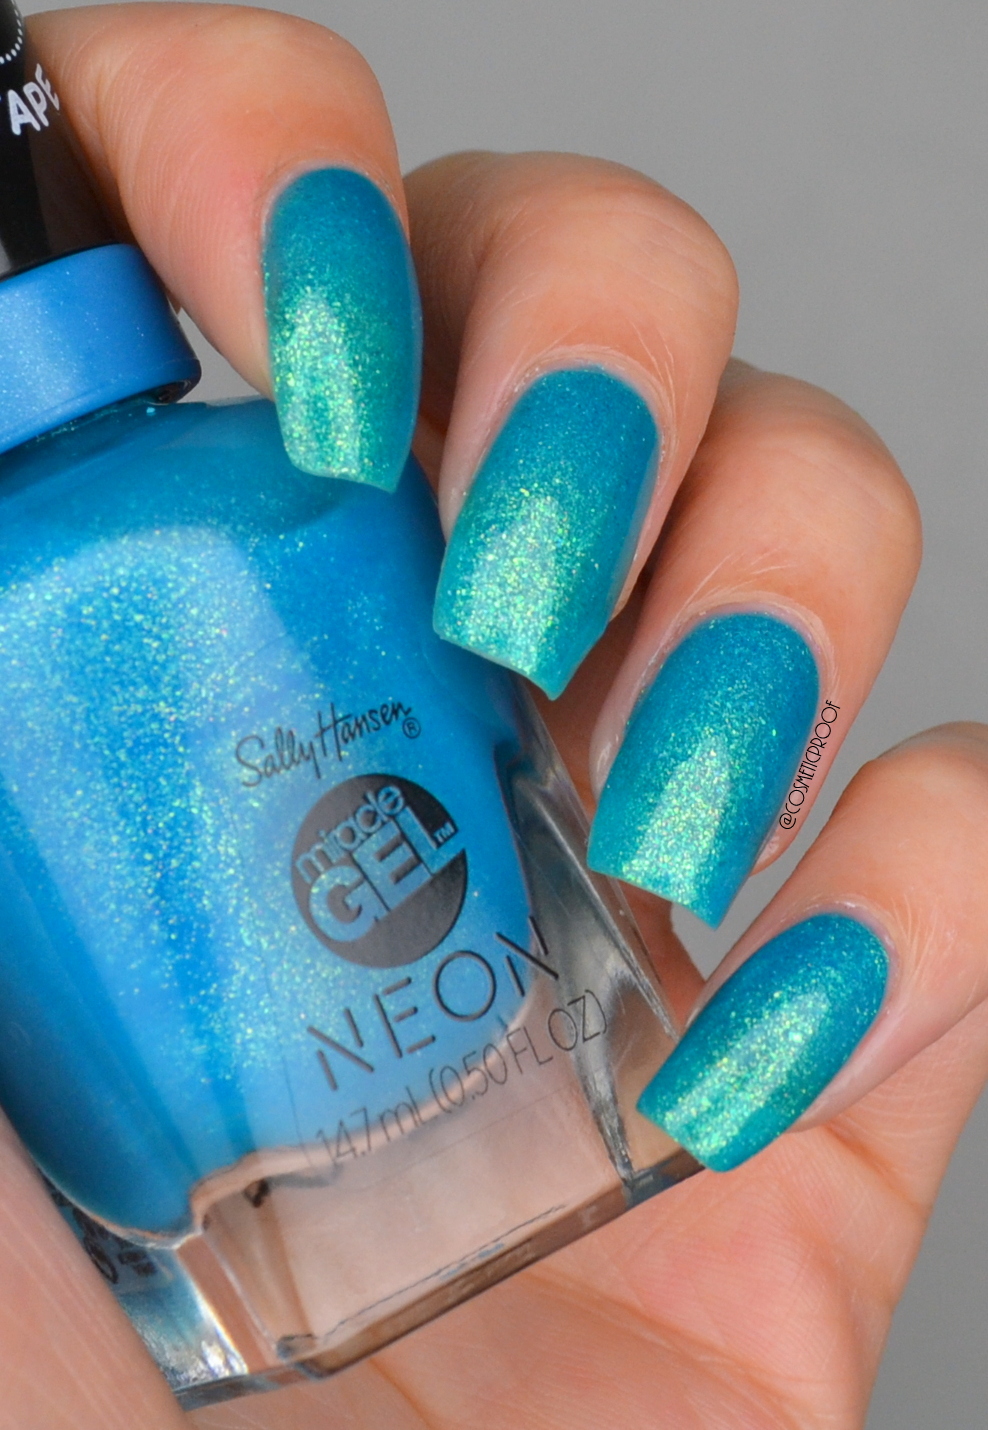 NAILS | Sally Hansen Miracle Gel Neon in Chill Out and Weekly Chat |  Cosmetic Proof | Vancouver beauty, nail art and lifestyle blog